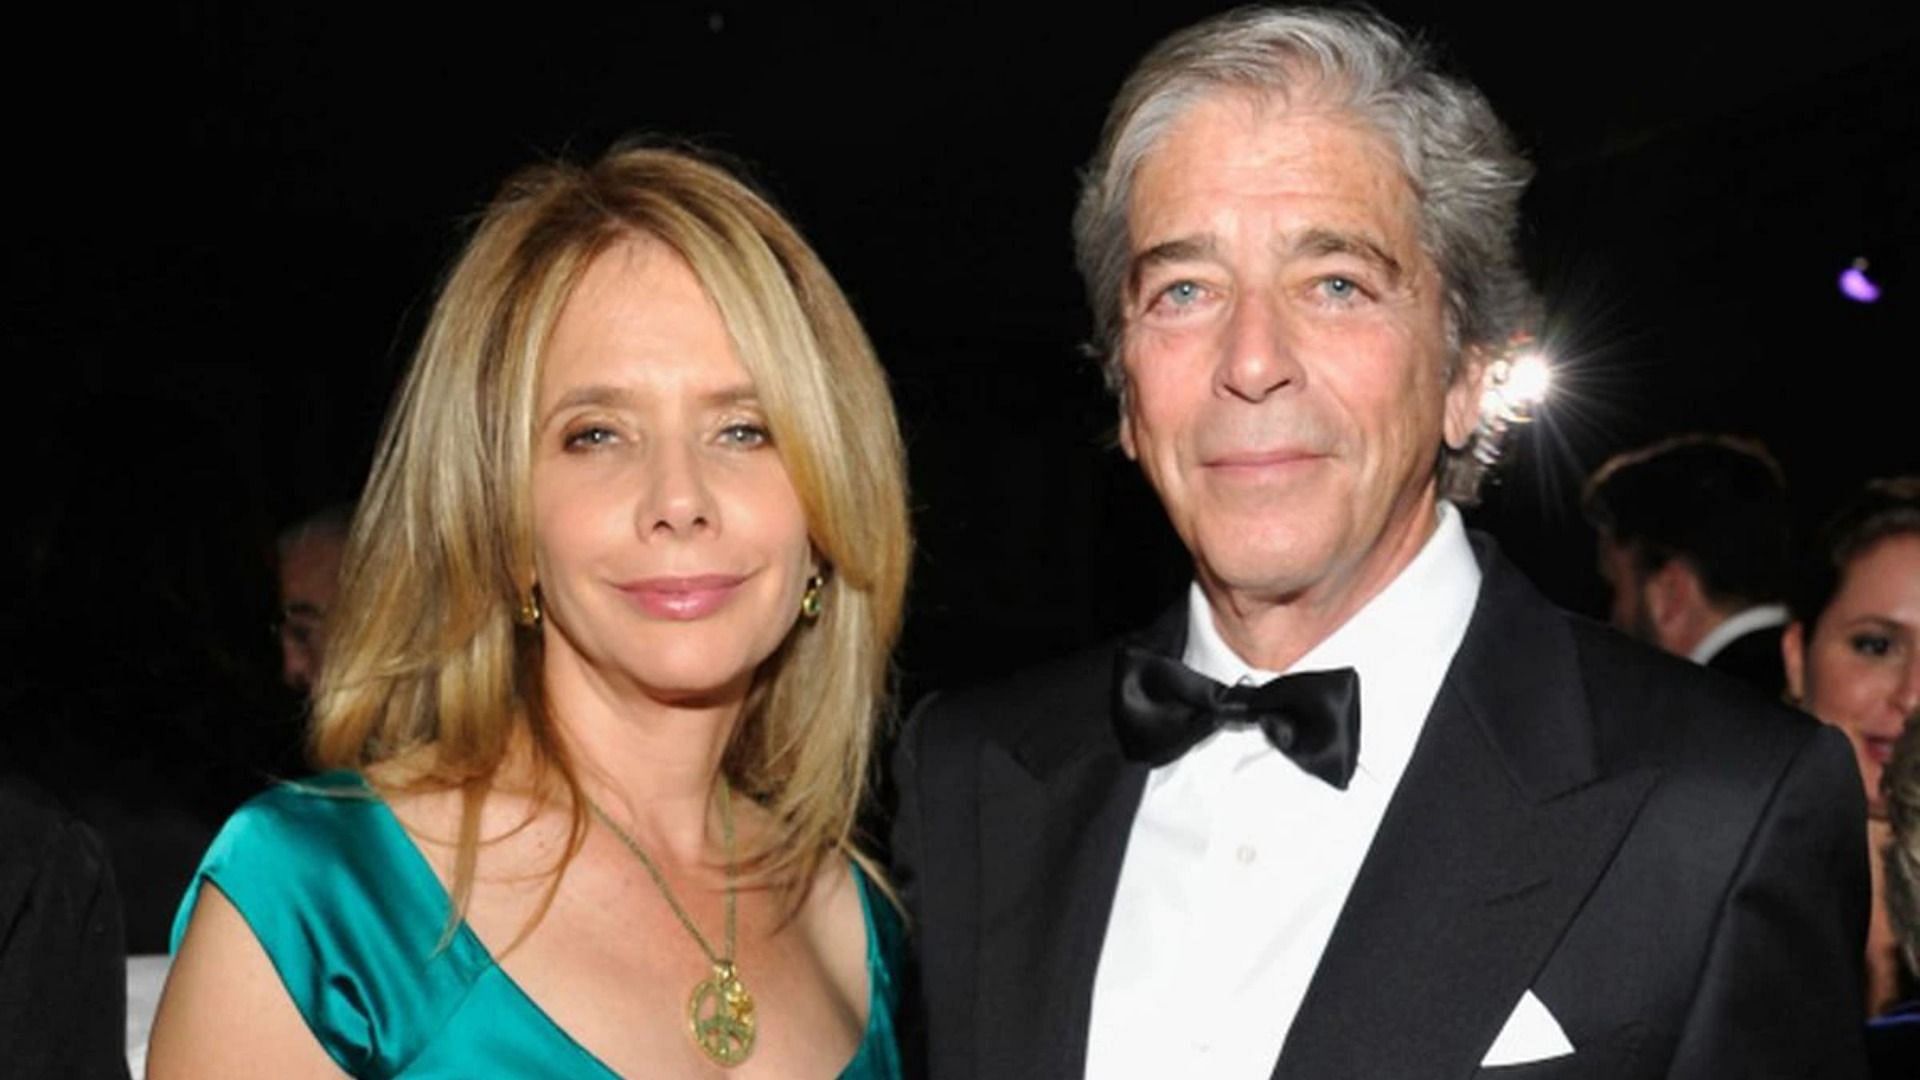 Rosanna Arquette was married to investment banker Todd Morgan for eight years (Image via Getty Images/ John Sciulli)